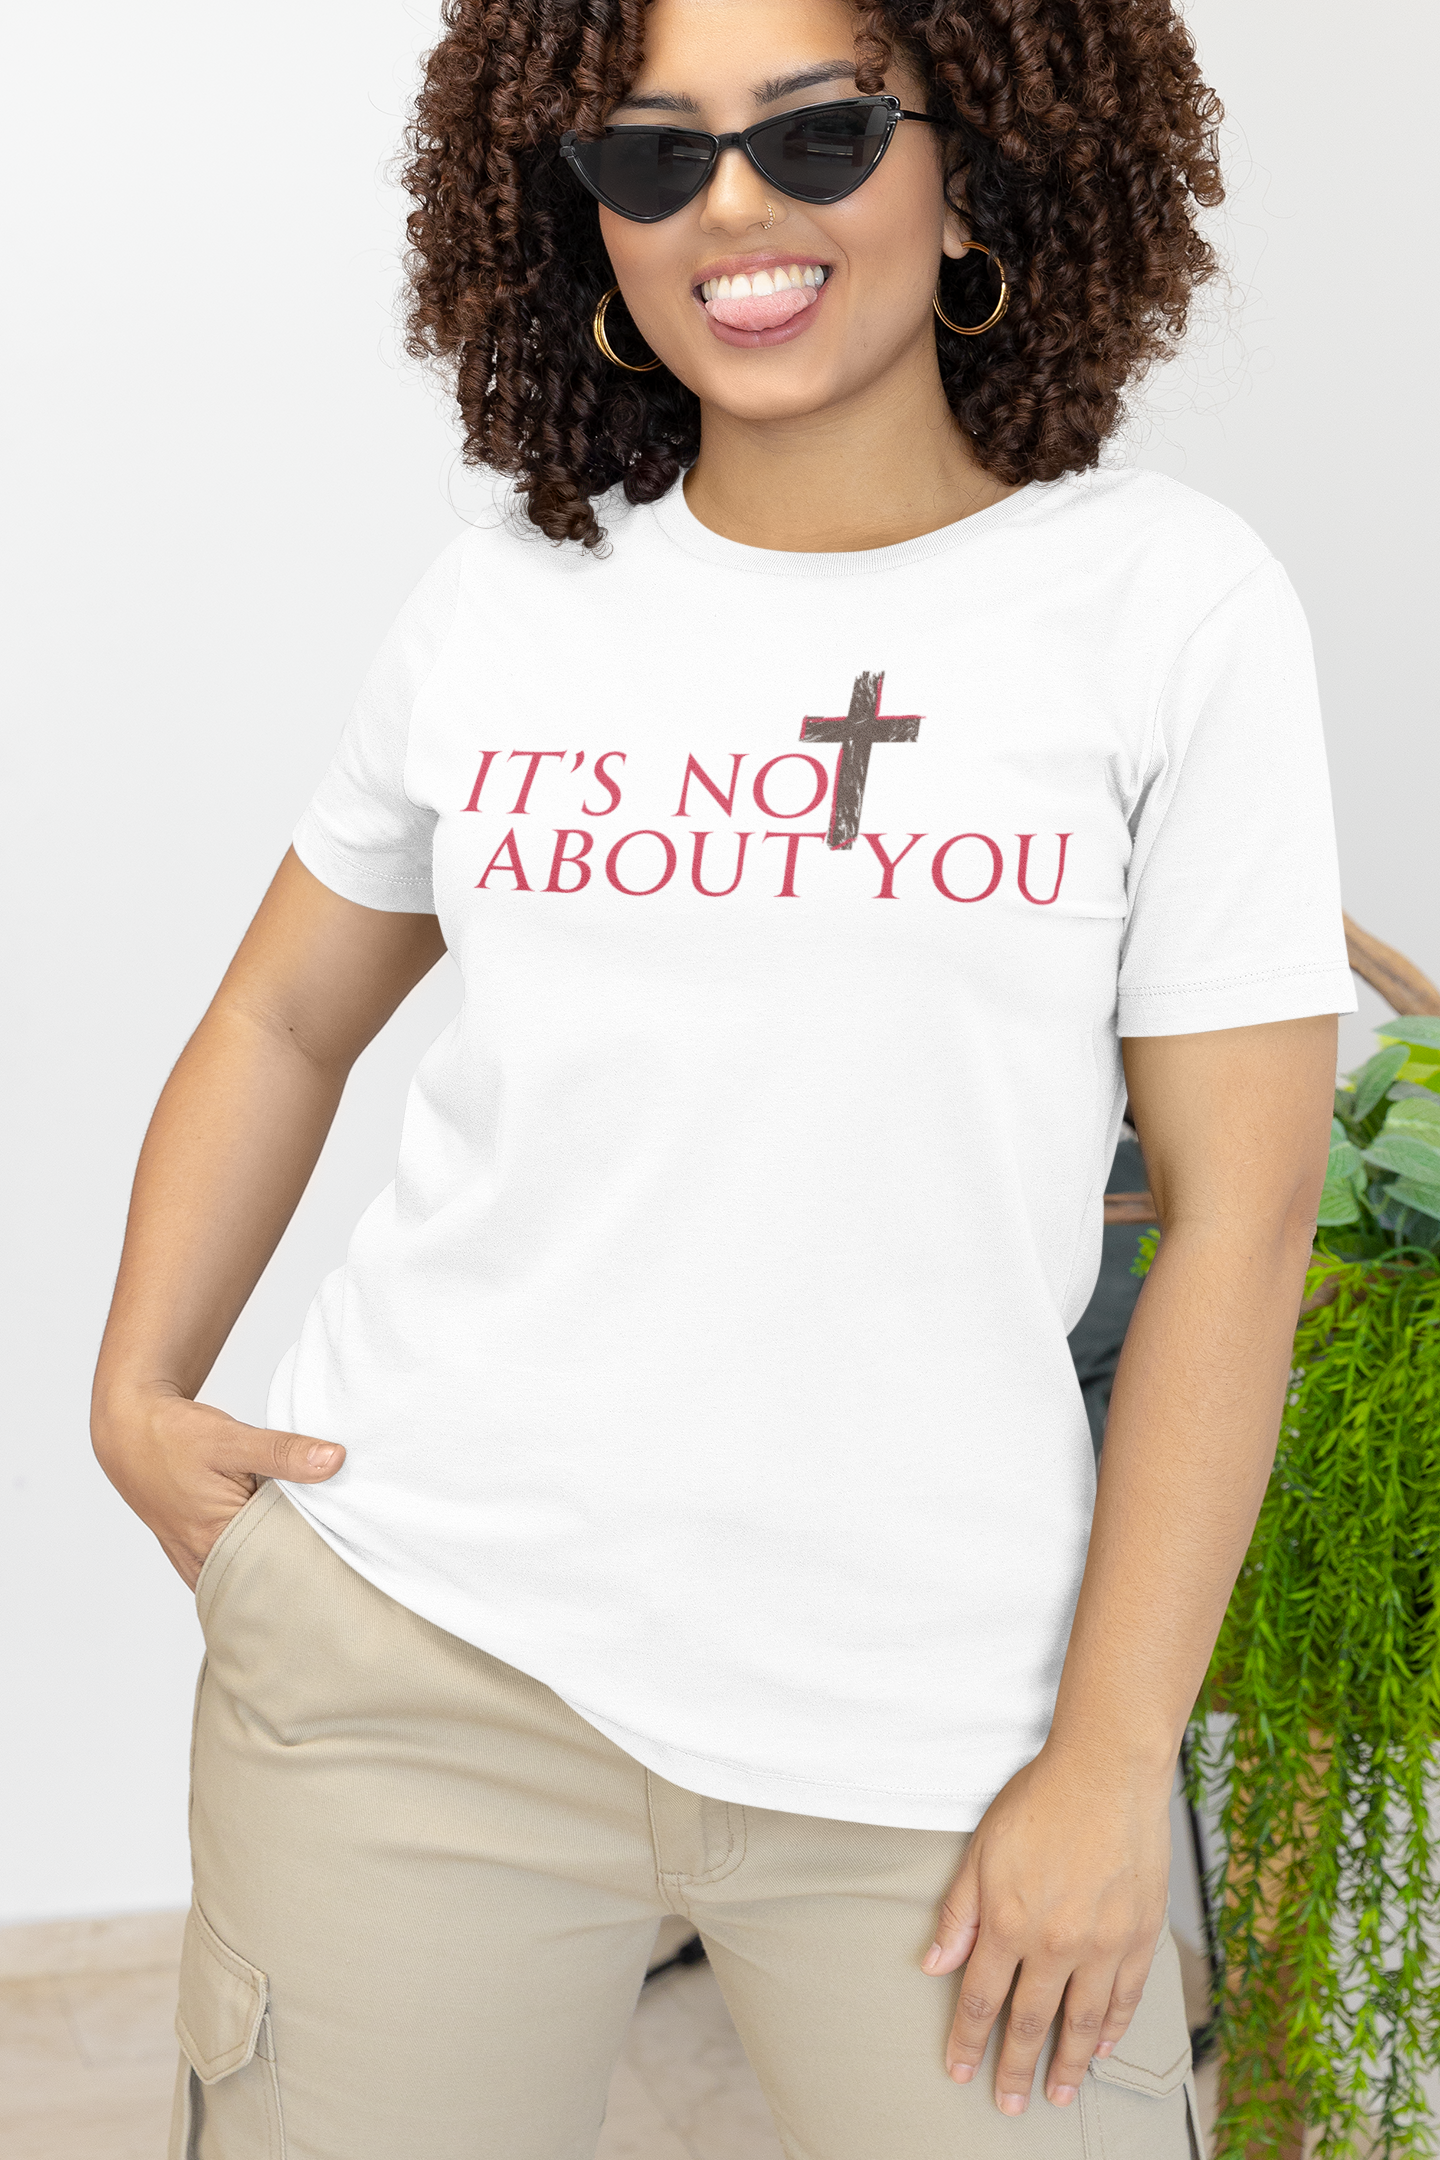 IT'S NOT ABOUT YOU T-shirt